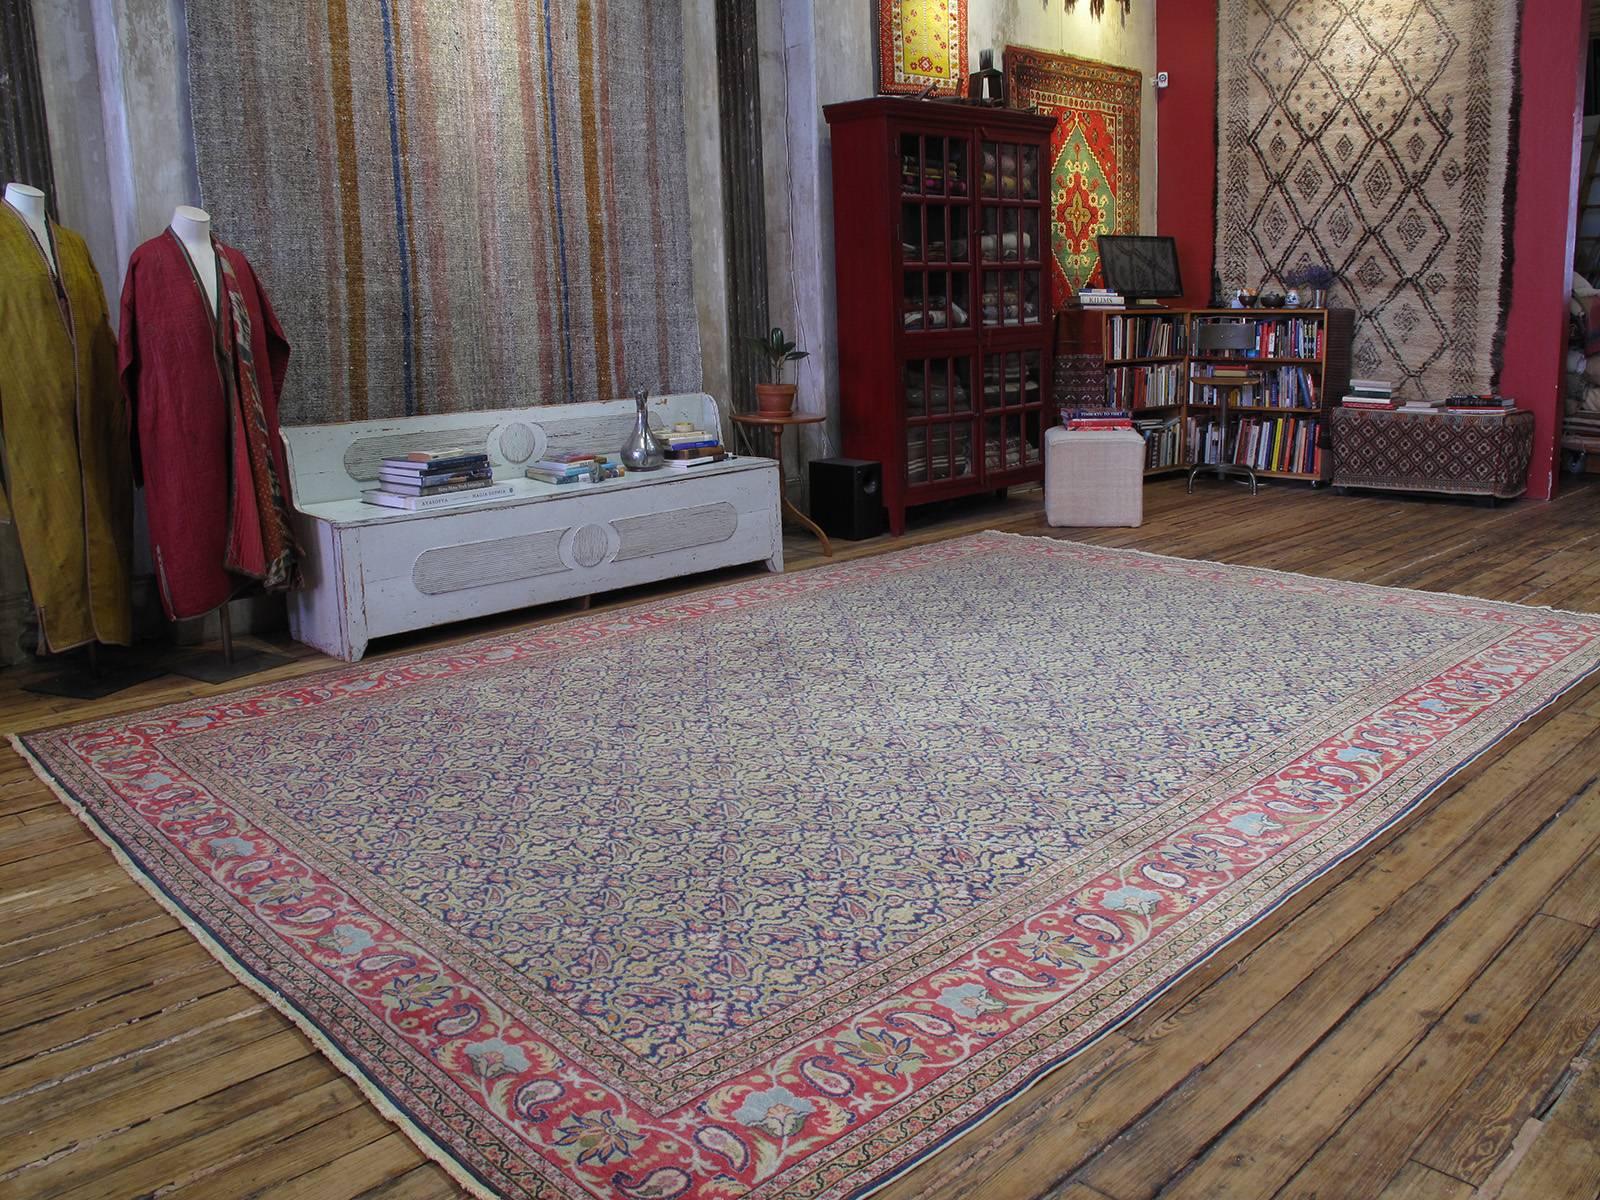 Fantastic Kayseri carpet or rug. A great old Turkish carpet from the Kayseri region in Central Turkey, with a highly unusual design and color palette. Though inspired by classical themes, Kayseri carpets can display very creative, whimsical